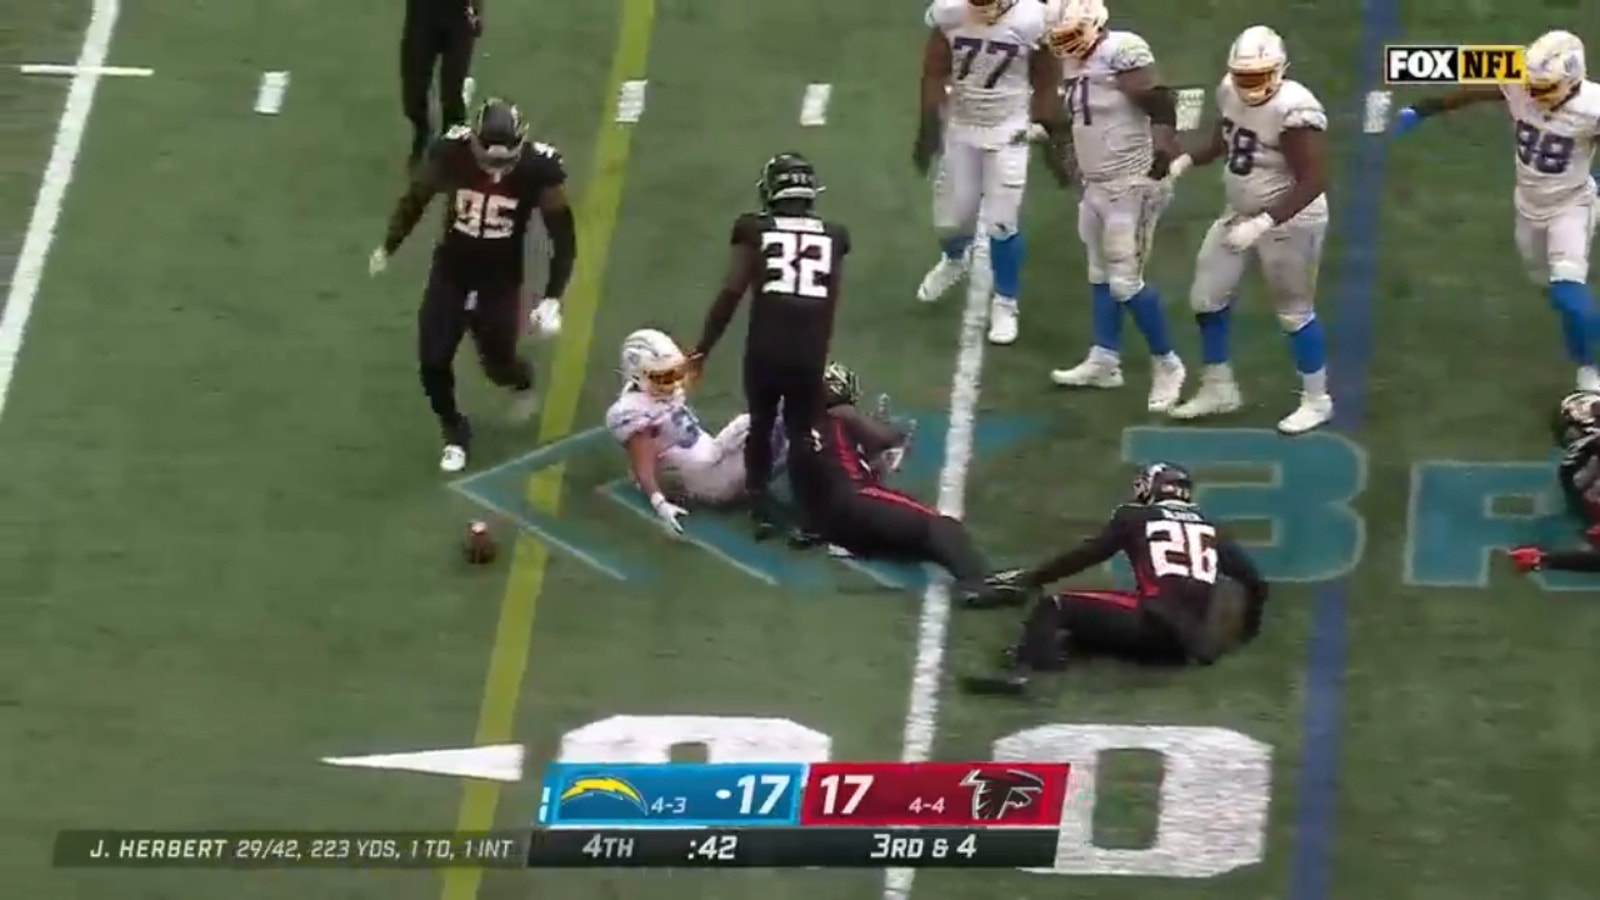 Chargers, Falcons fumble on the same play